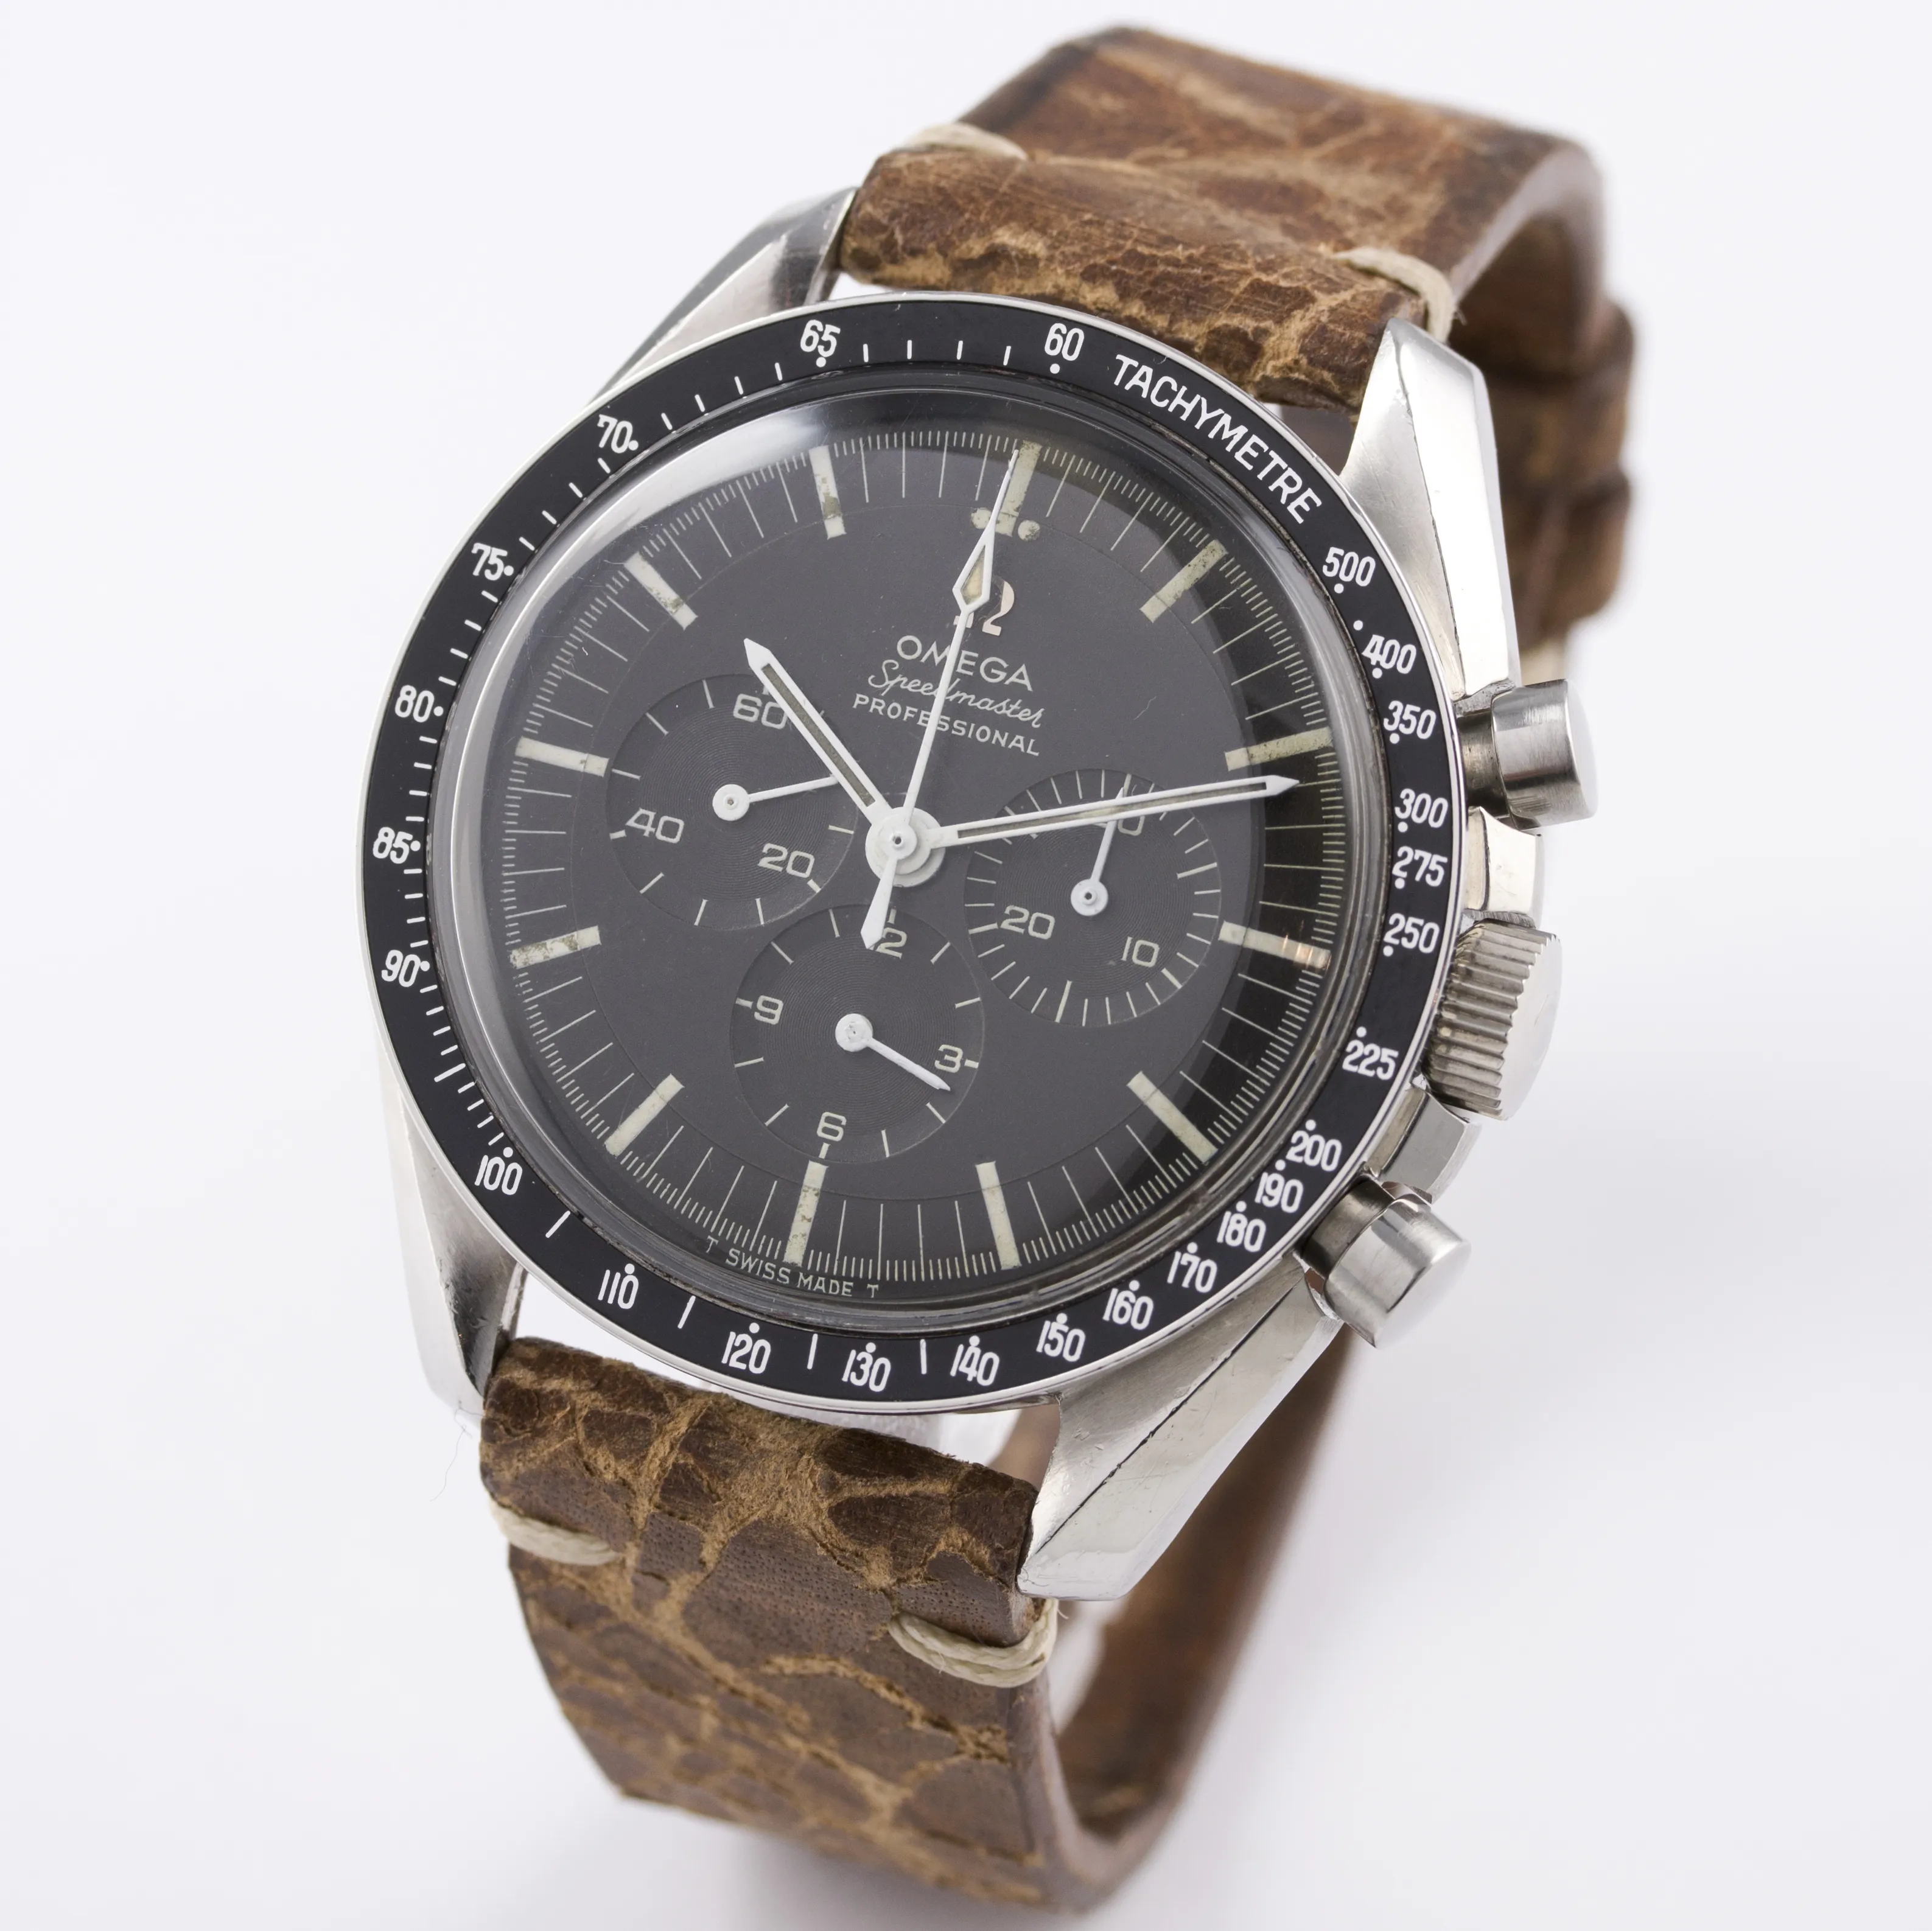 Omega Speedmaster Professional Moonwatch Moonphase 145.012-67 42mm Stainless steel Black 2